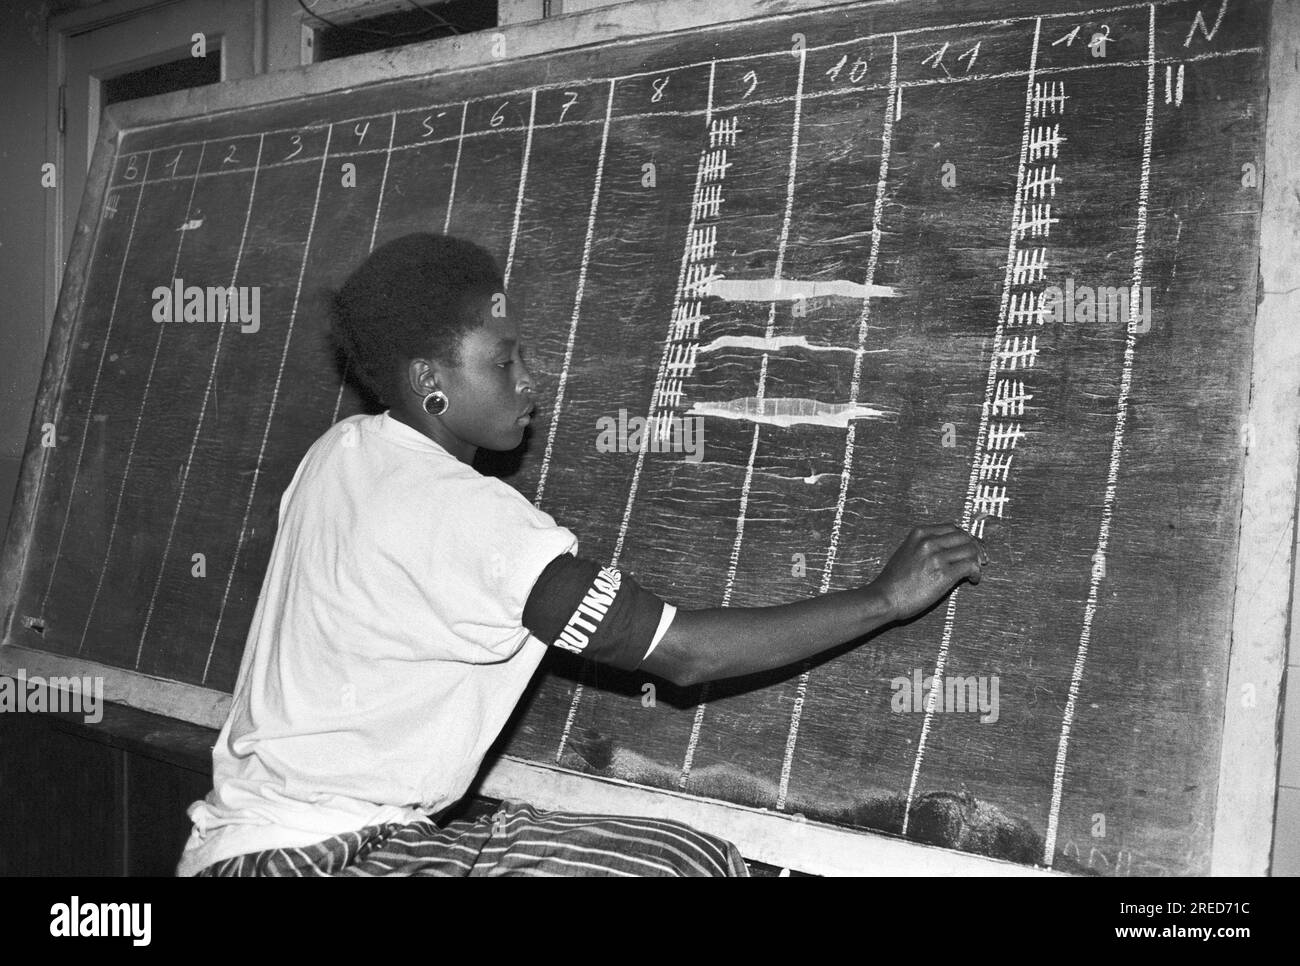 Angola, Huambo, 27.09.1992 Archive: 36-76-02 Parliamentary elections Photo: Votes are counted [automated translation] Stock Photo